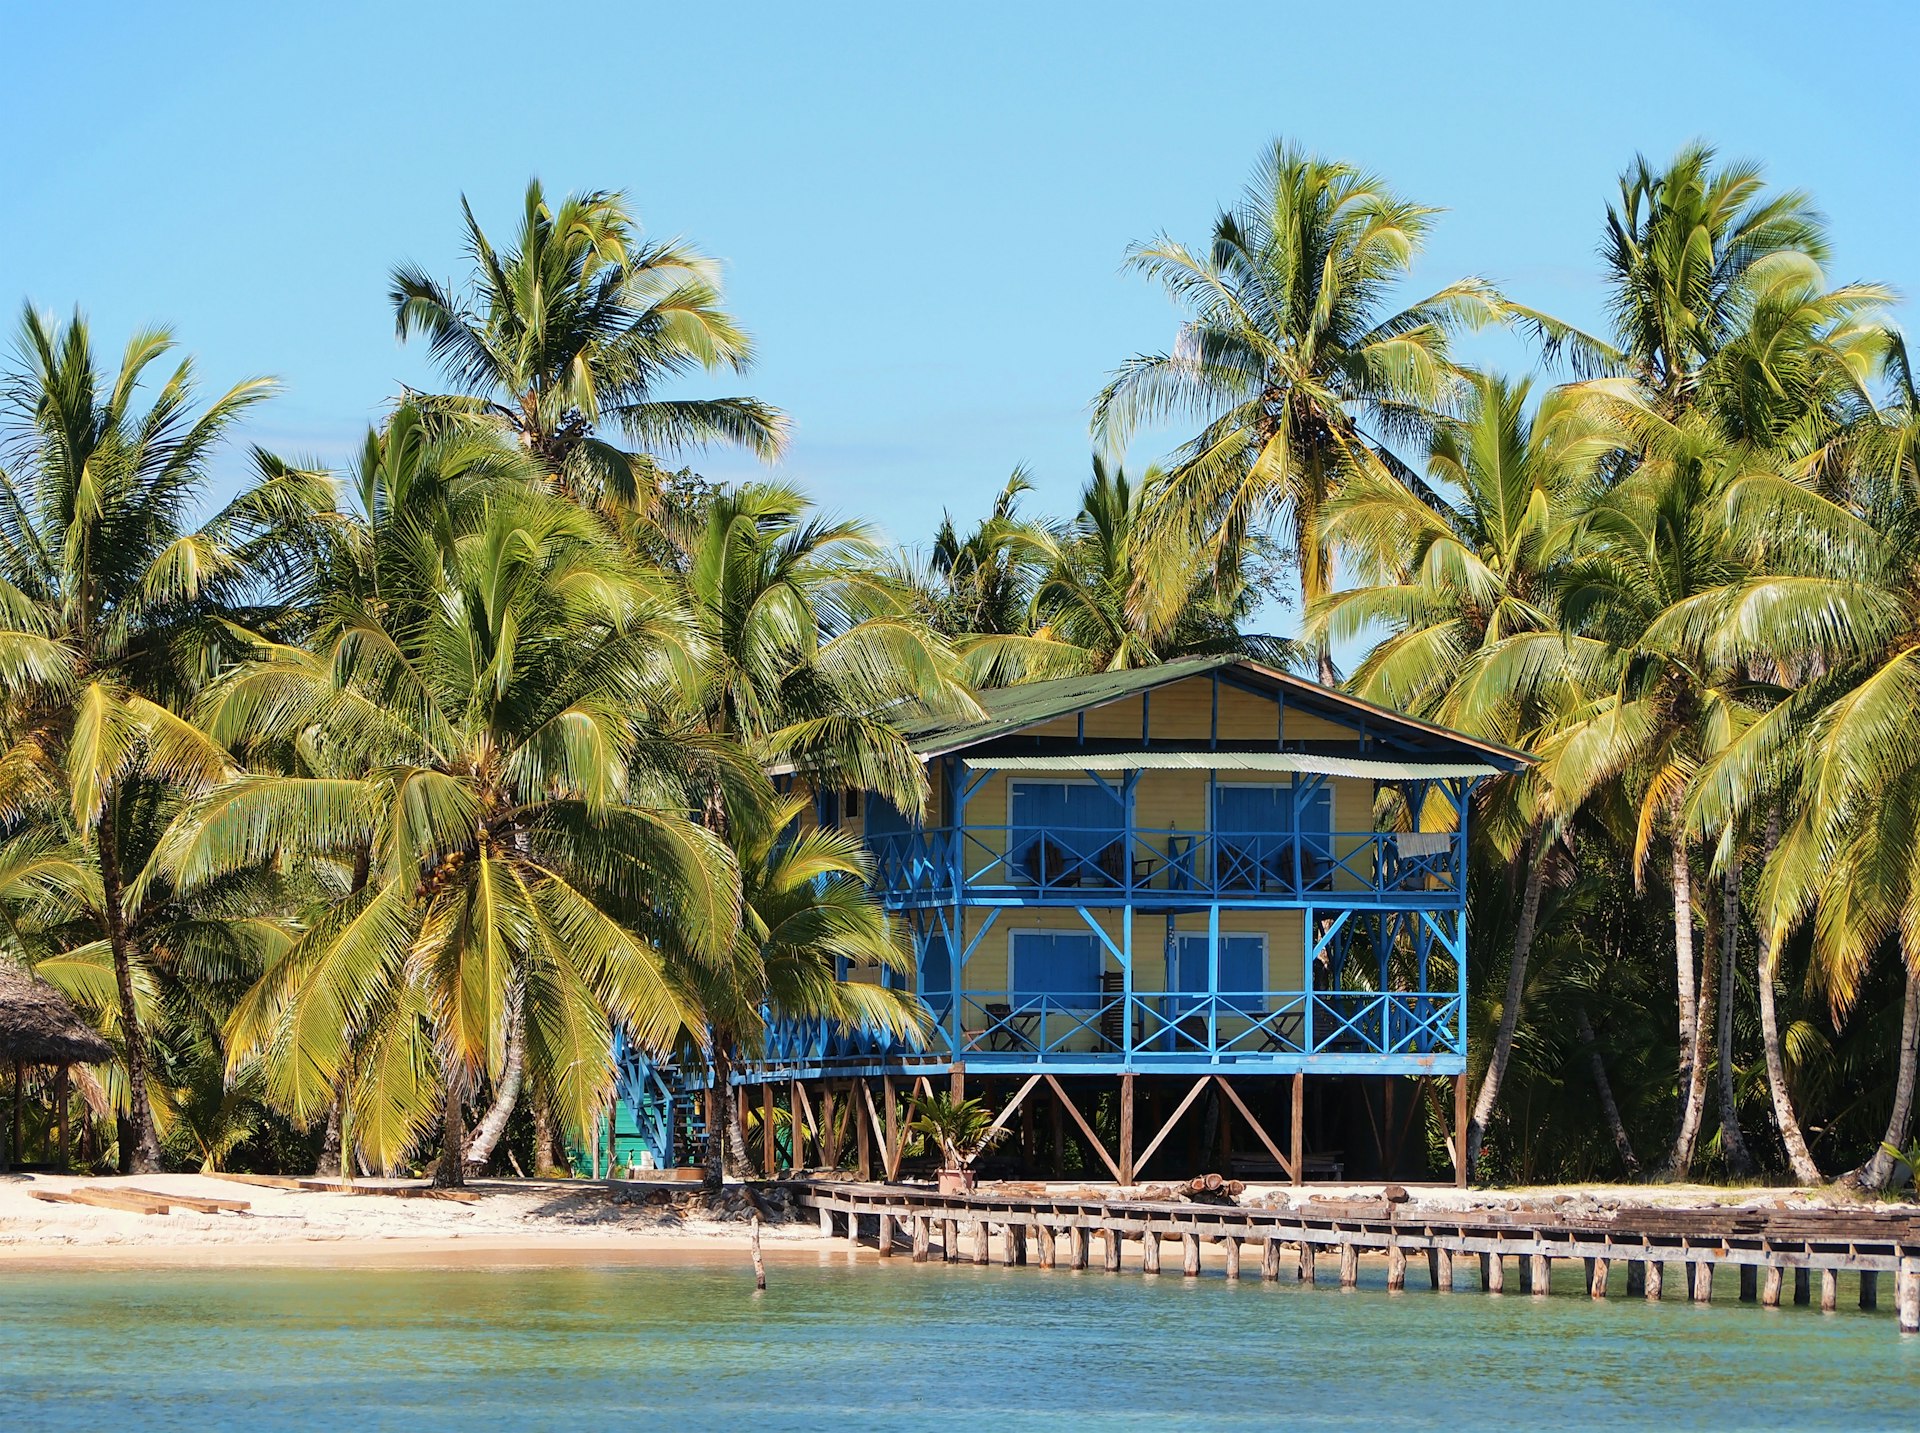 Tropical beach house with coconut trees and a dock, Caribbean side of Panama, Central America